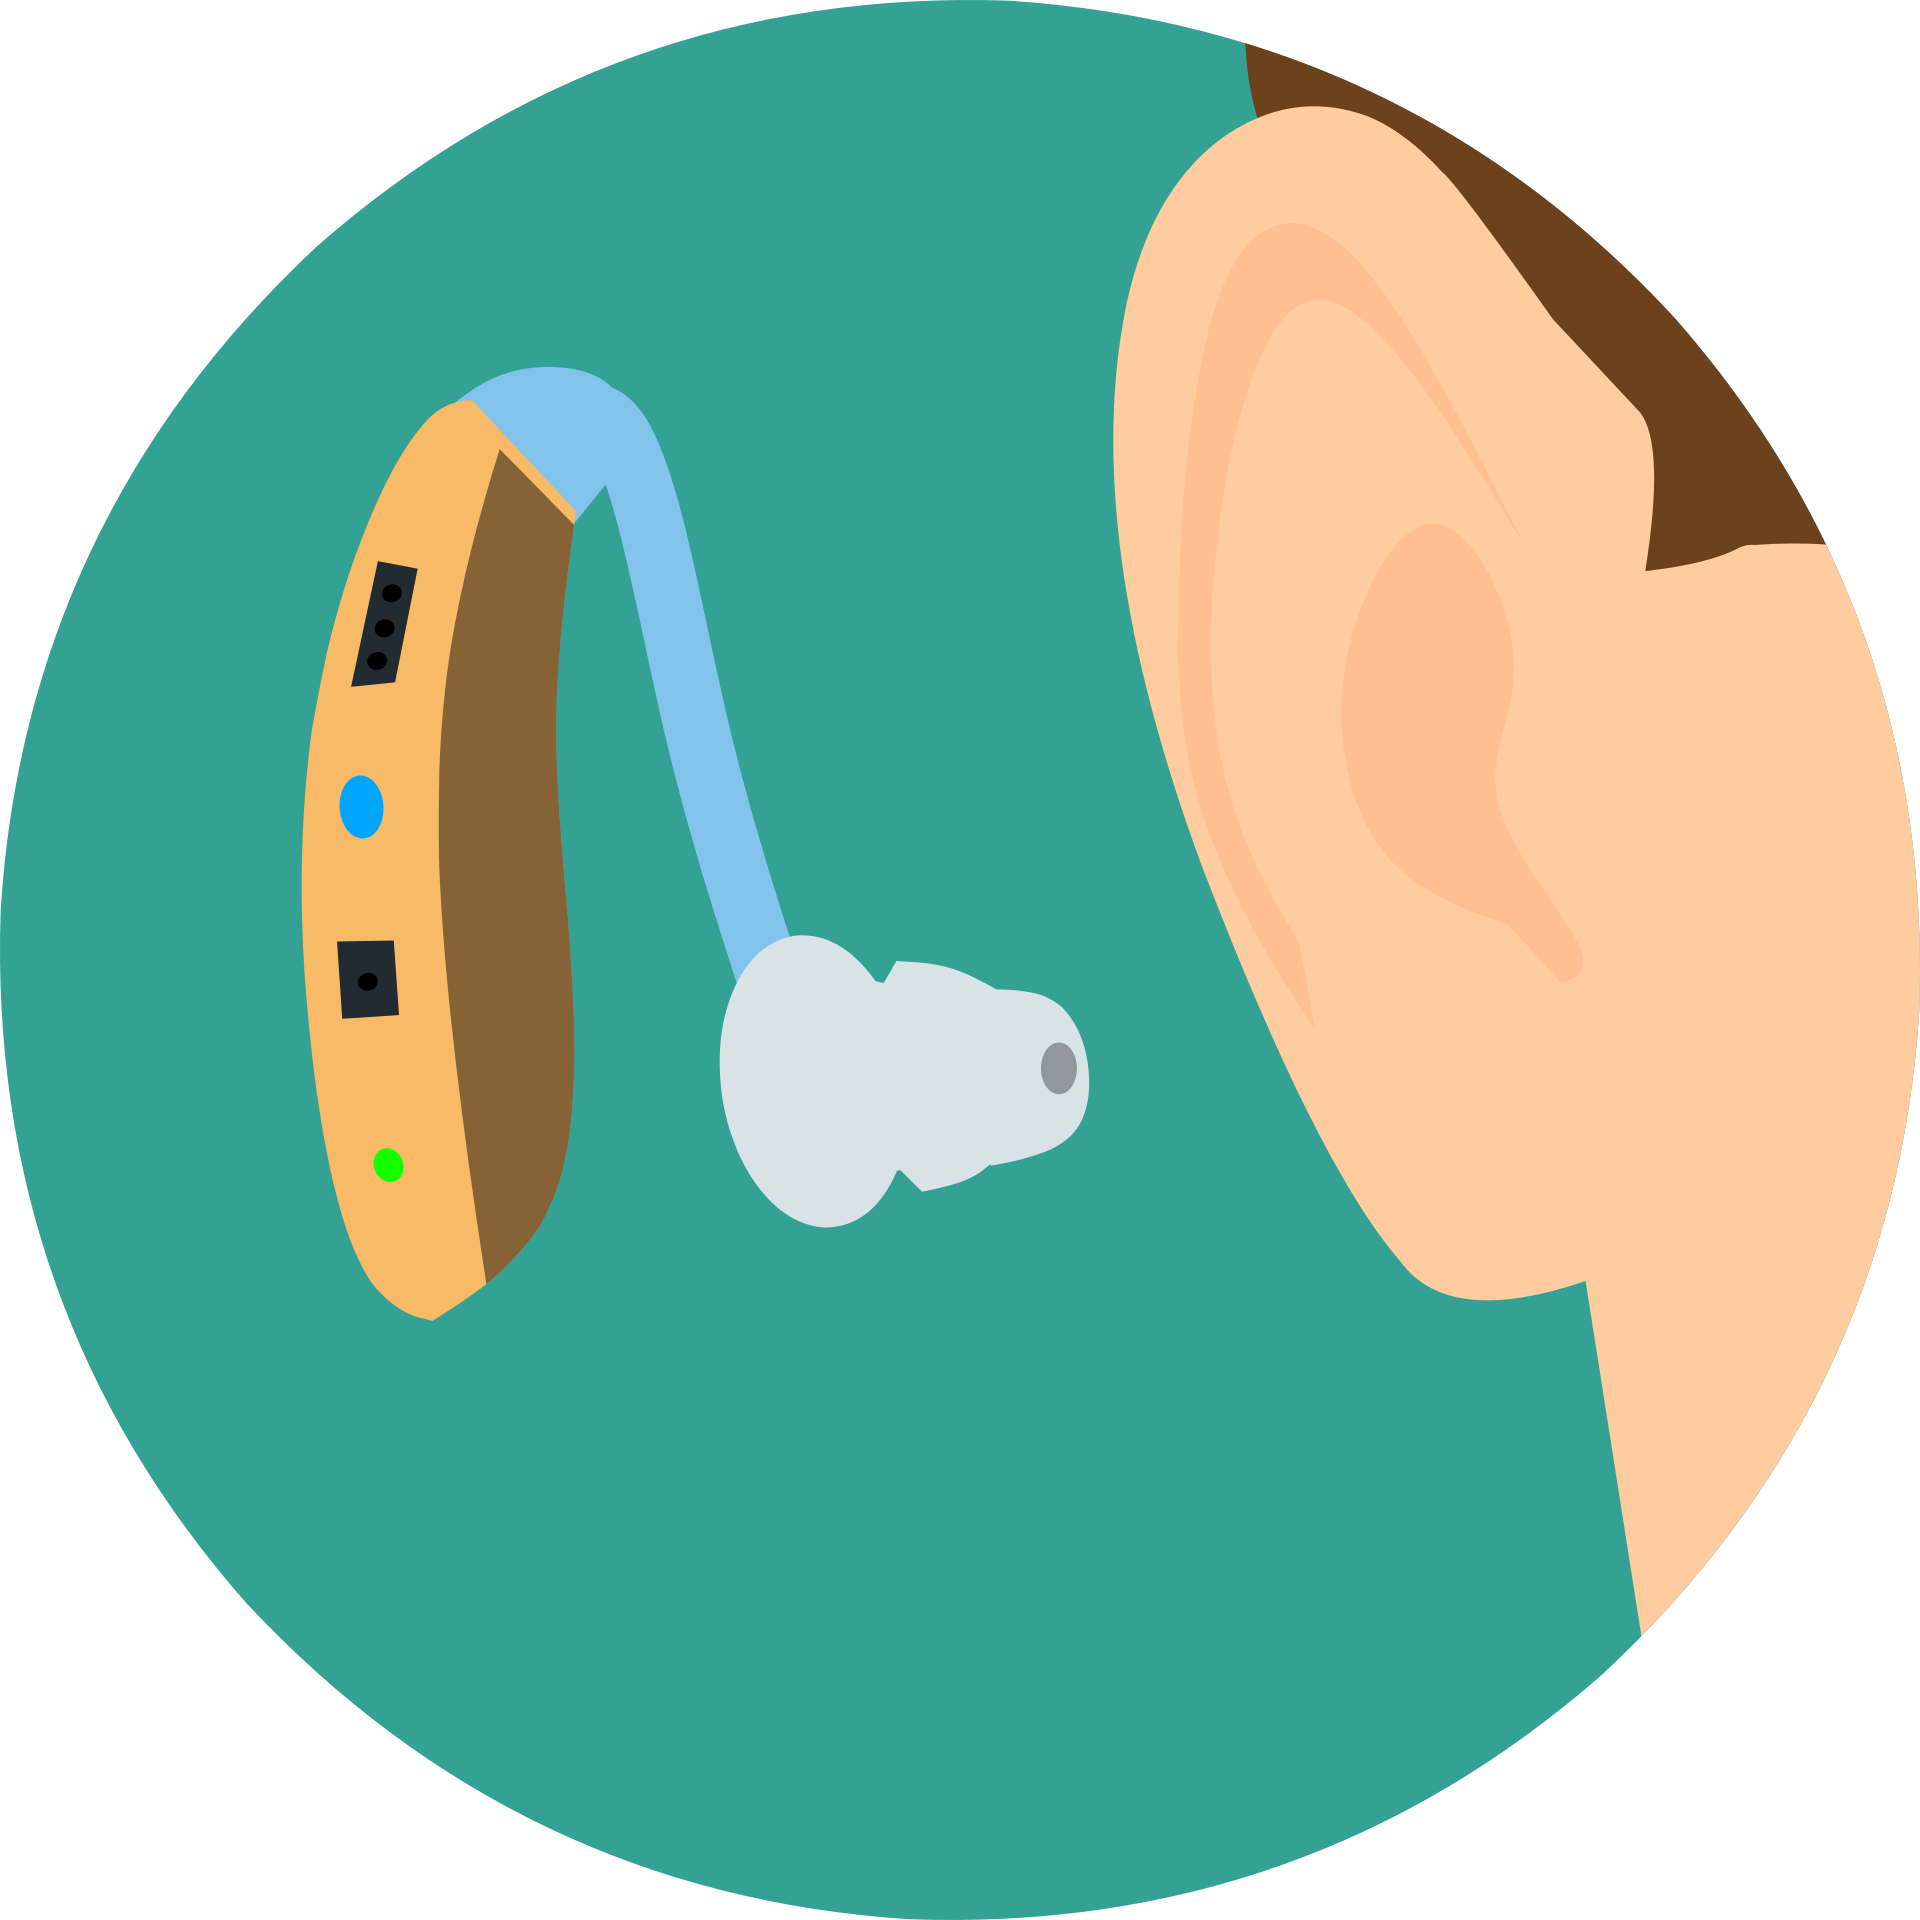 Ilustration of hearing aid and ear